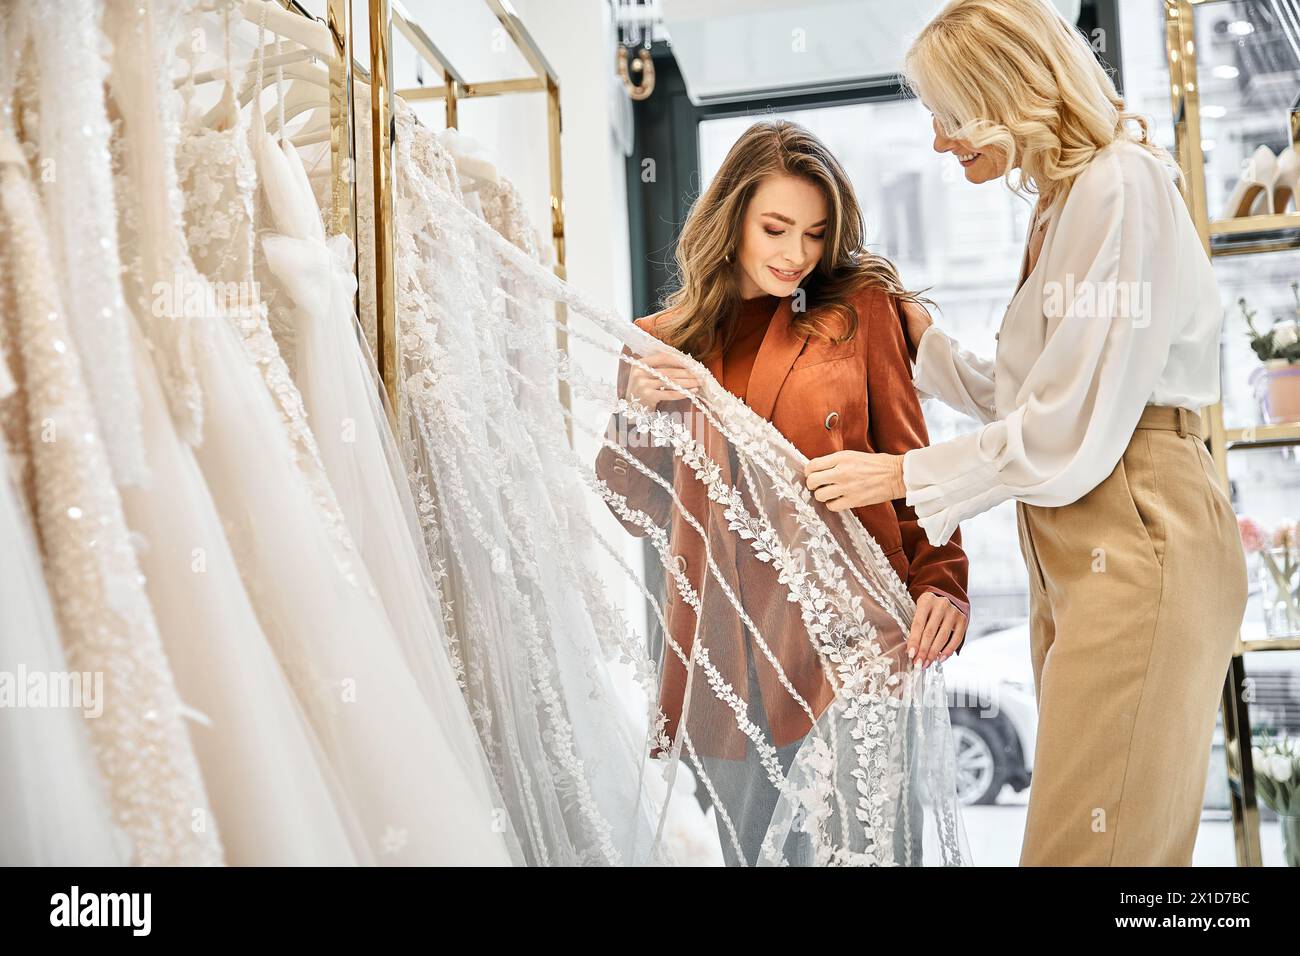 Two women, a young bride and her mother, admiring wedding dresses in a bridal store with excitement and anticipation. Stock Photo